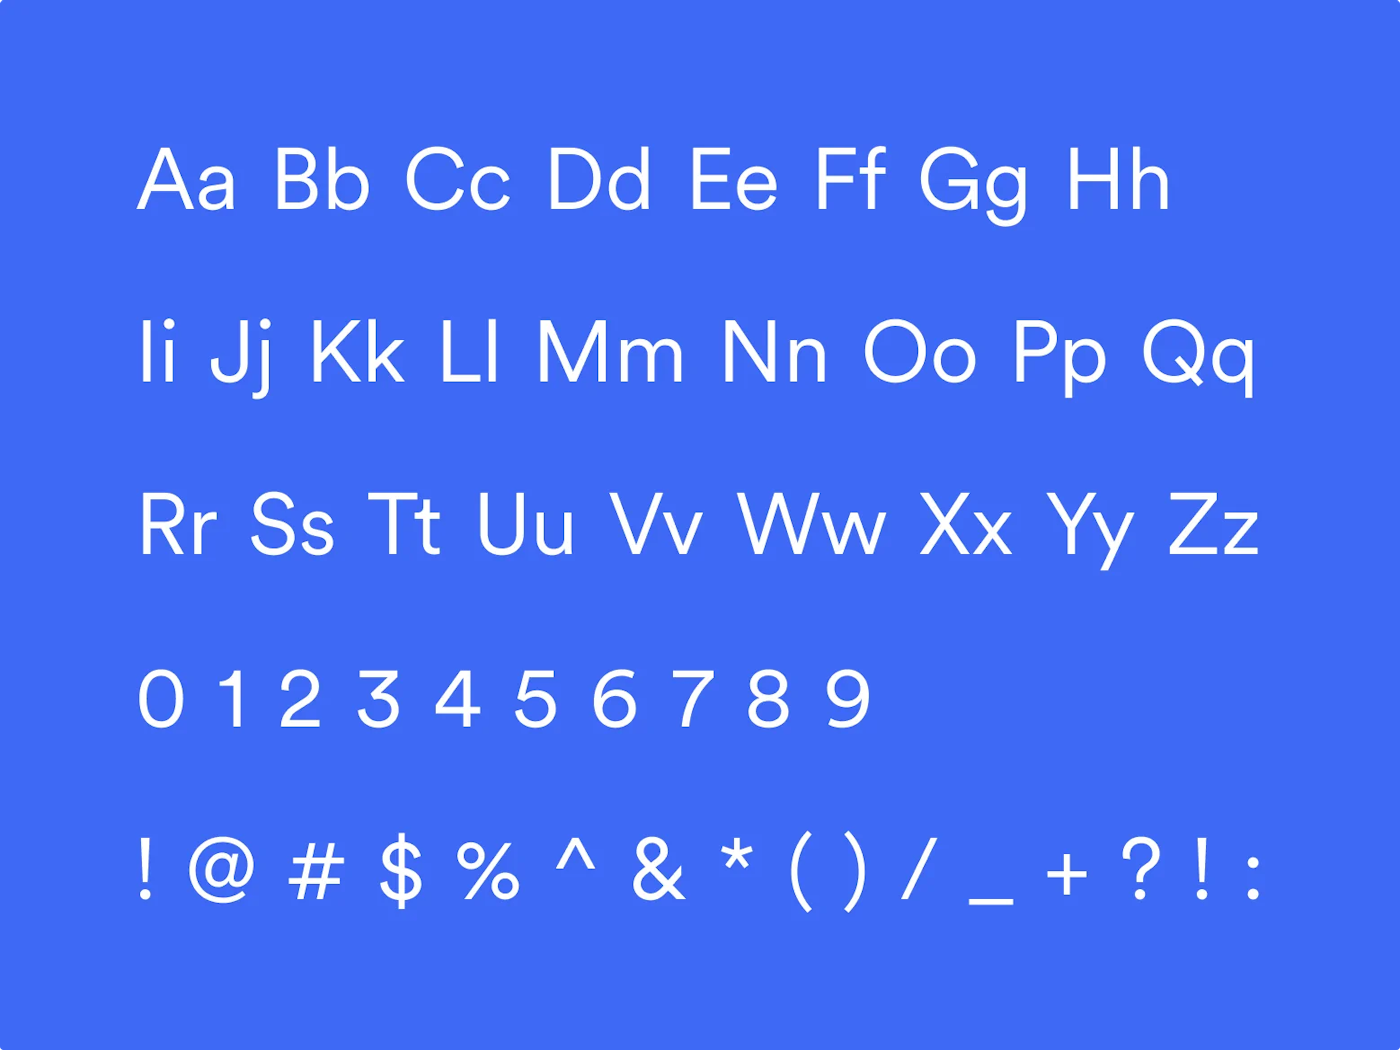 Characters of the Circular typeface displayed in both pairs of uppercase and lowercase versions of alphabetical characters, as well as numbers and other miscellaneous character. All characters as set in white on a blue background.